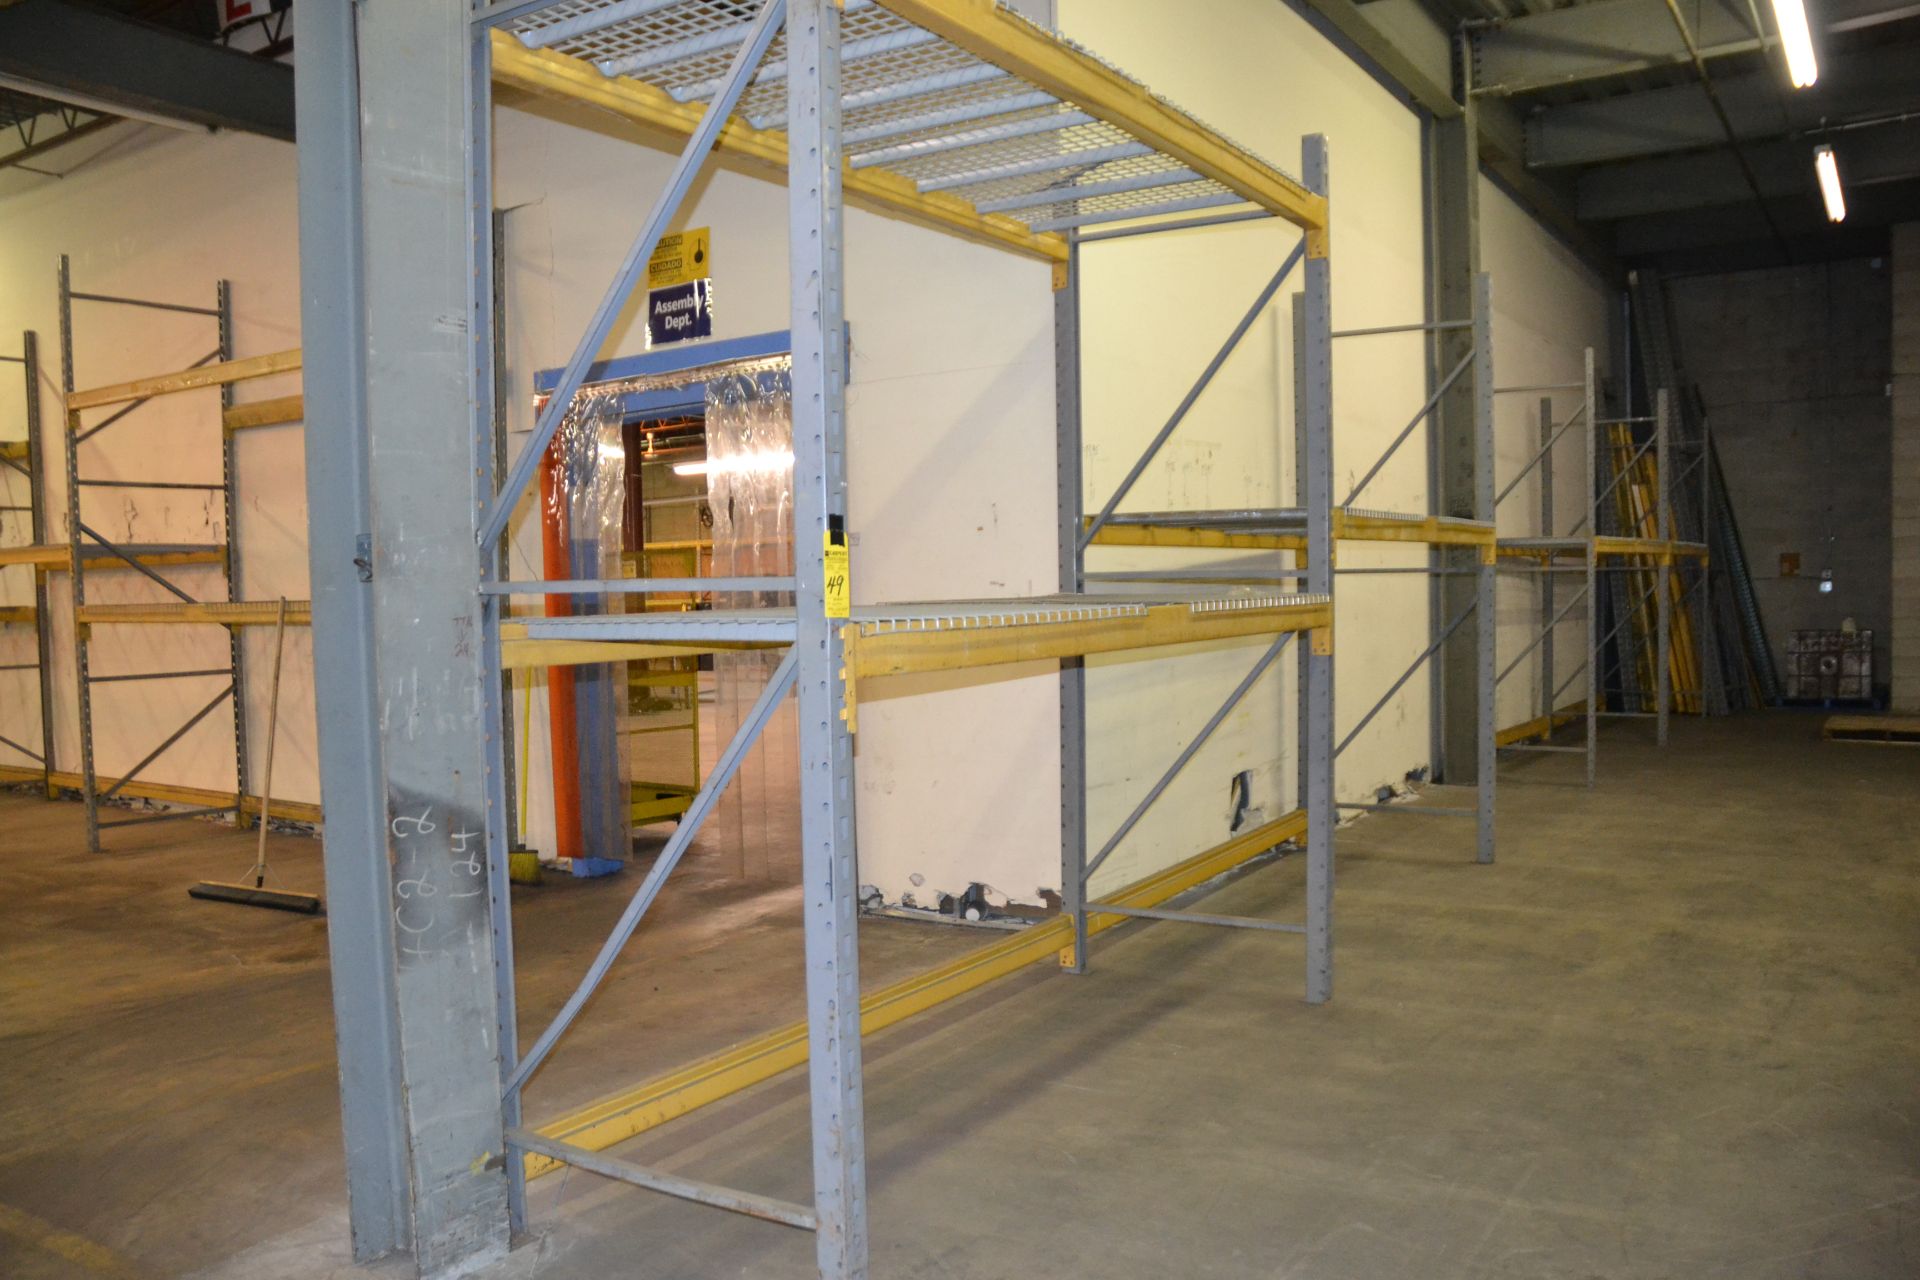 SECTIONS OF HEVY DUTY PALLET RACKING